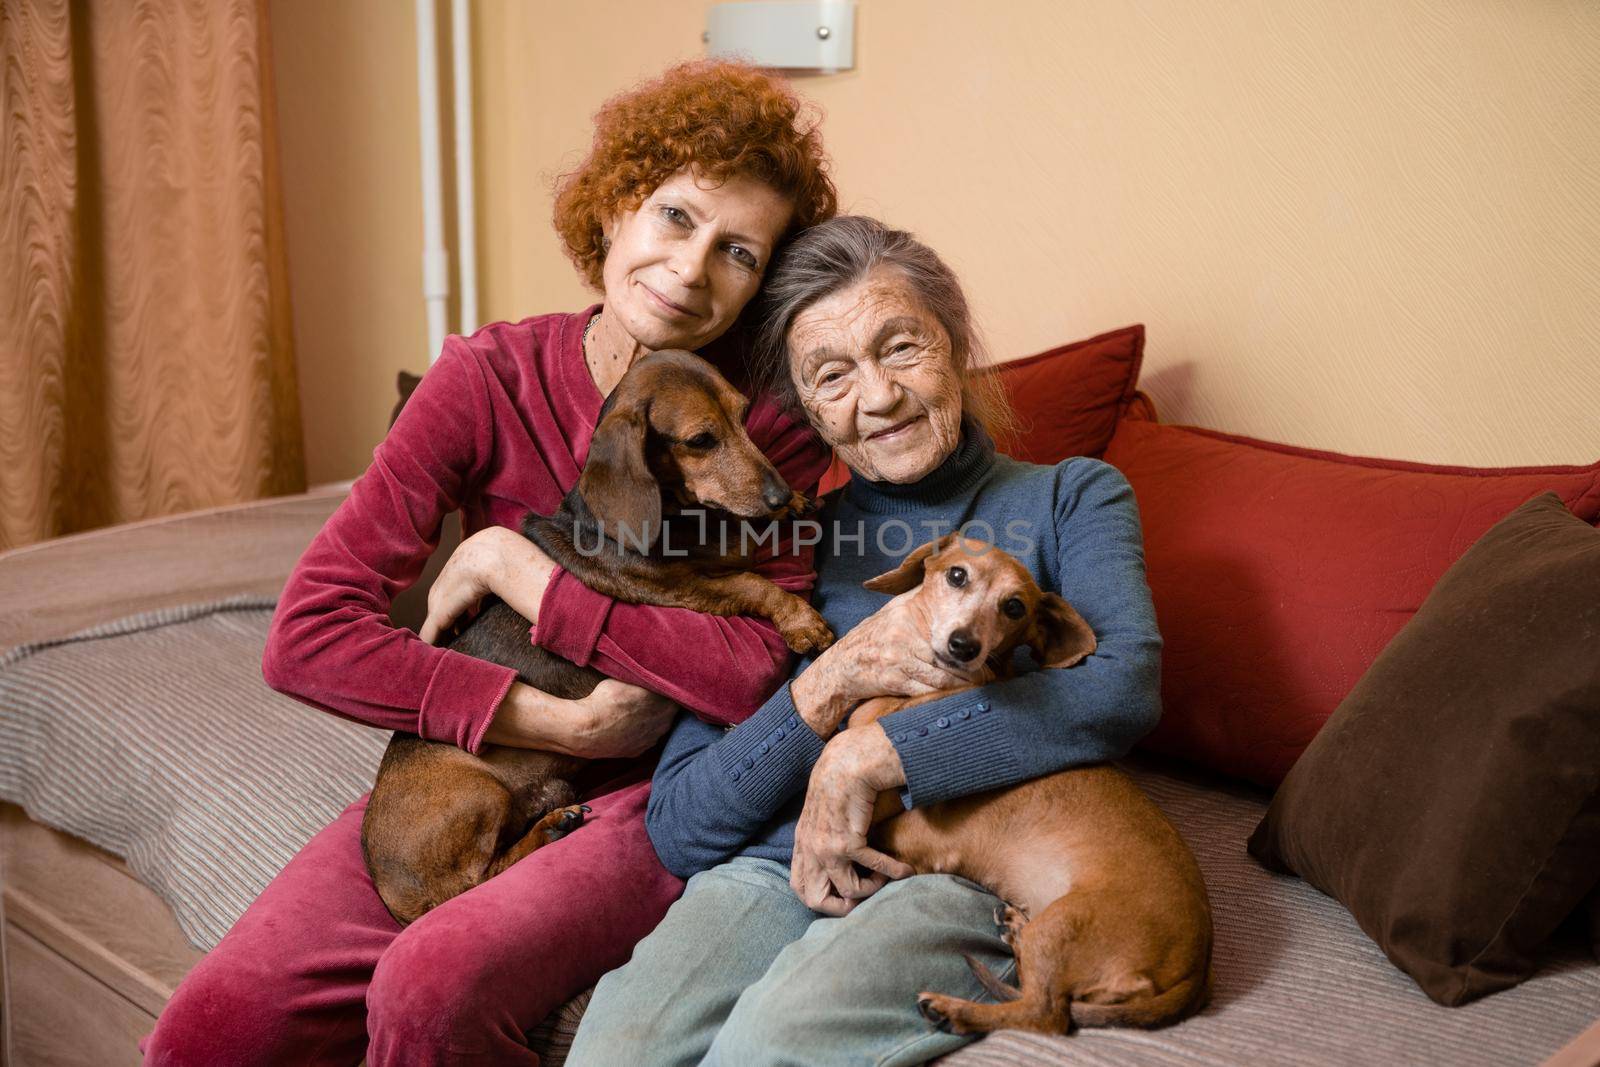 The theme is animal therapy, caring for elderly with dementia and Alzheimer's disease. Adult women spend time with elderly mother and pets dogs to bring joy and pleasure, affection for loved ones by Tomashevska